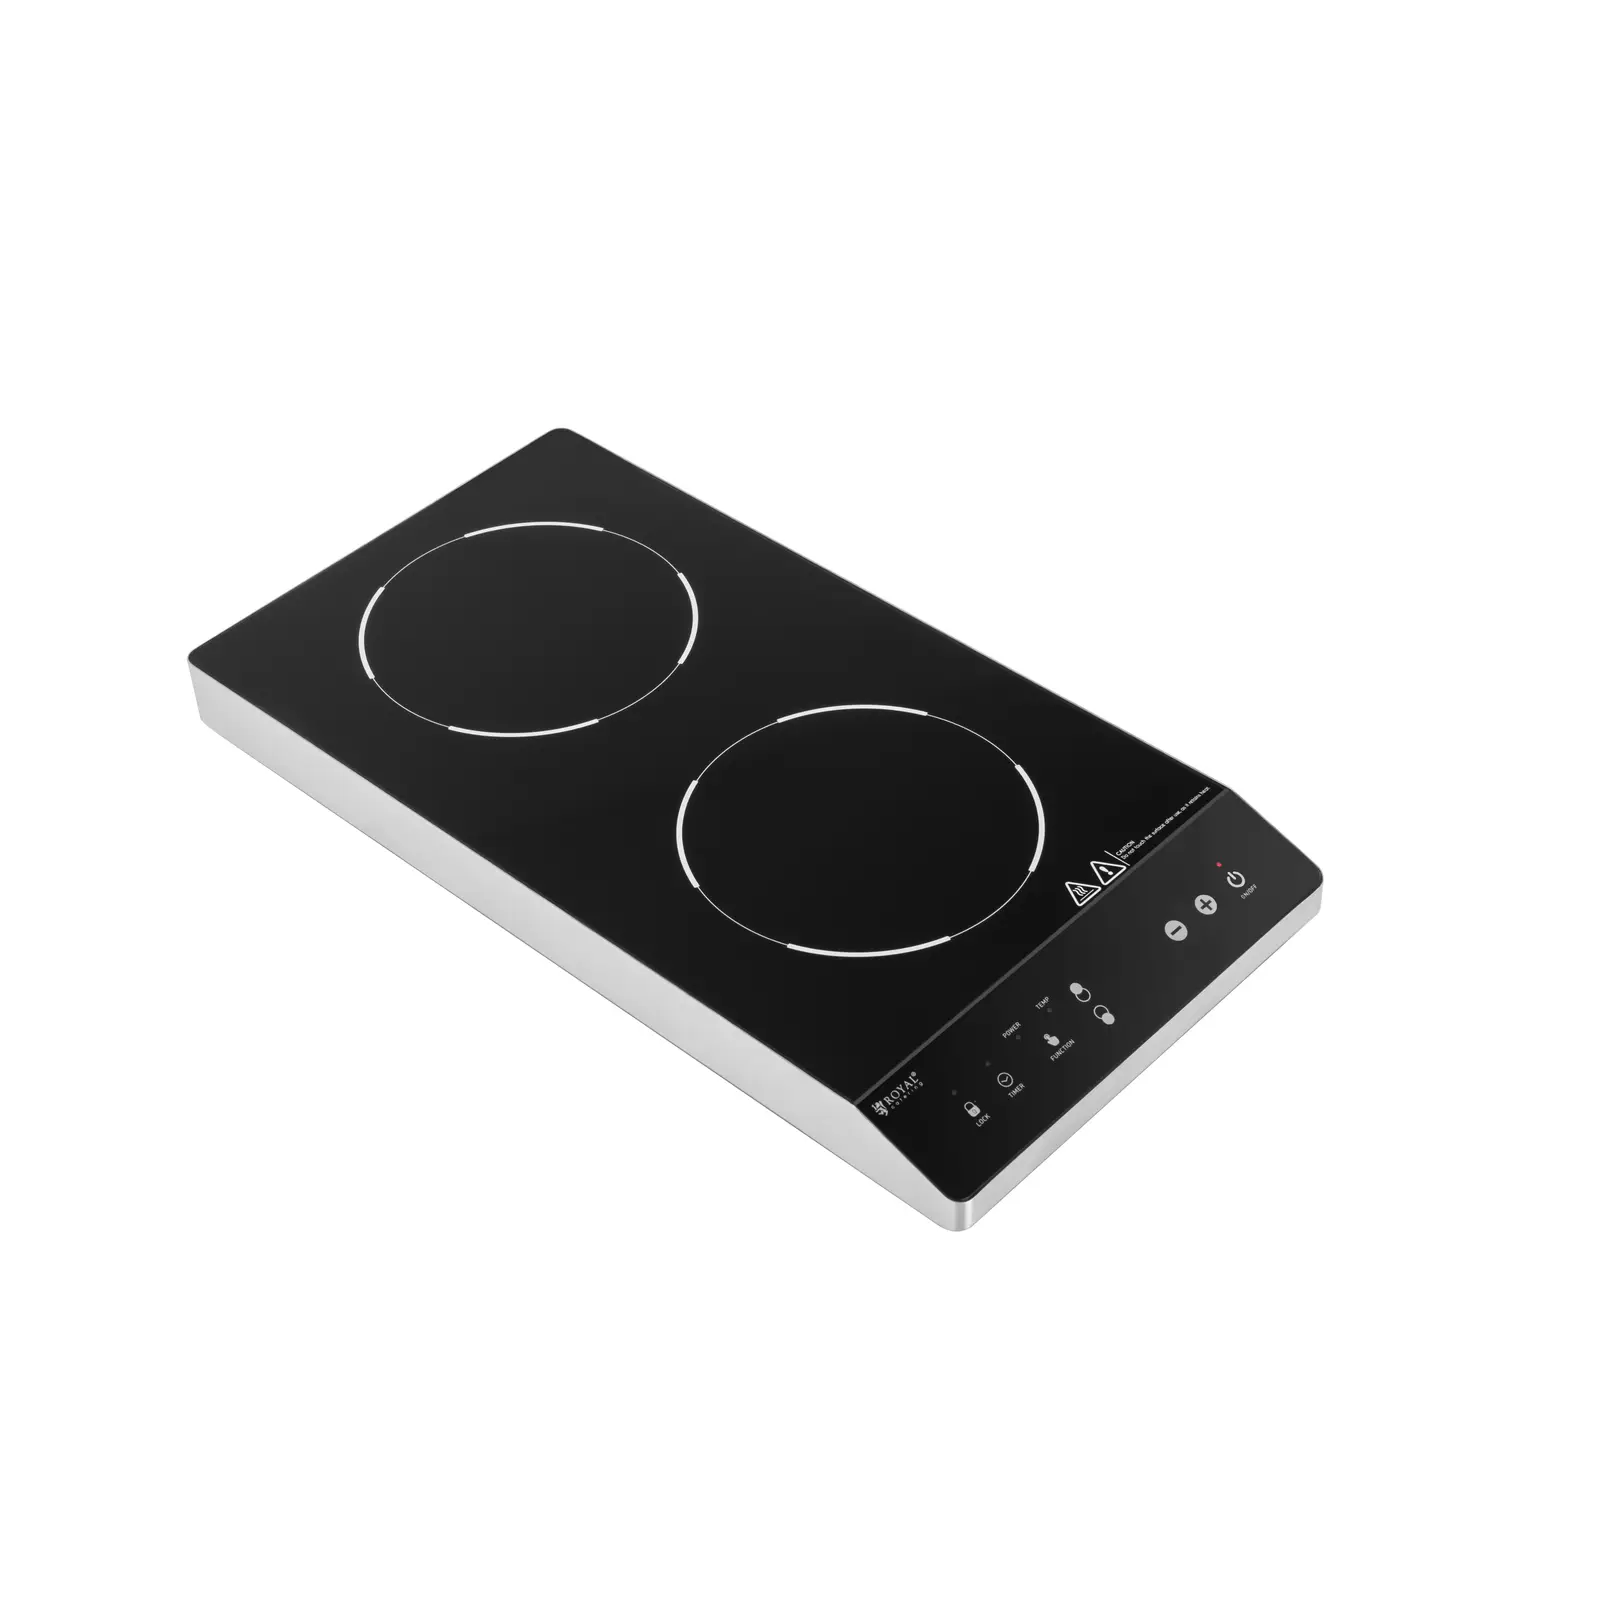 Induction Cooker - 2 x 22 cm - 60 to 240 °C - timer